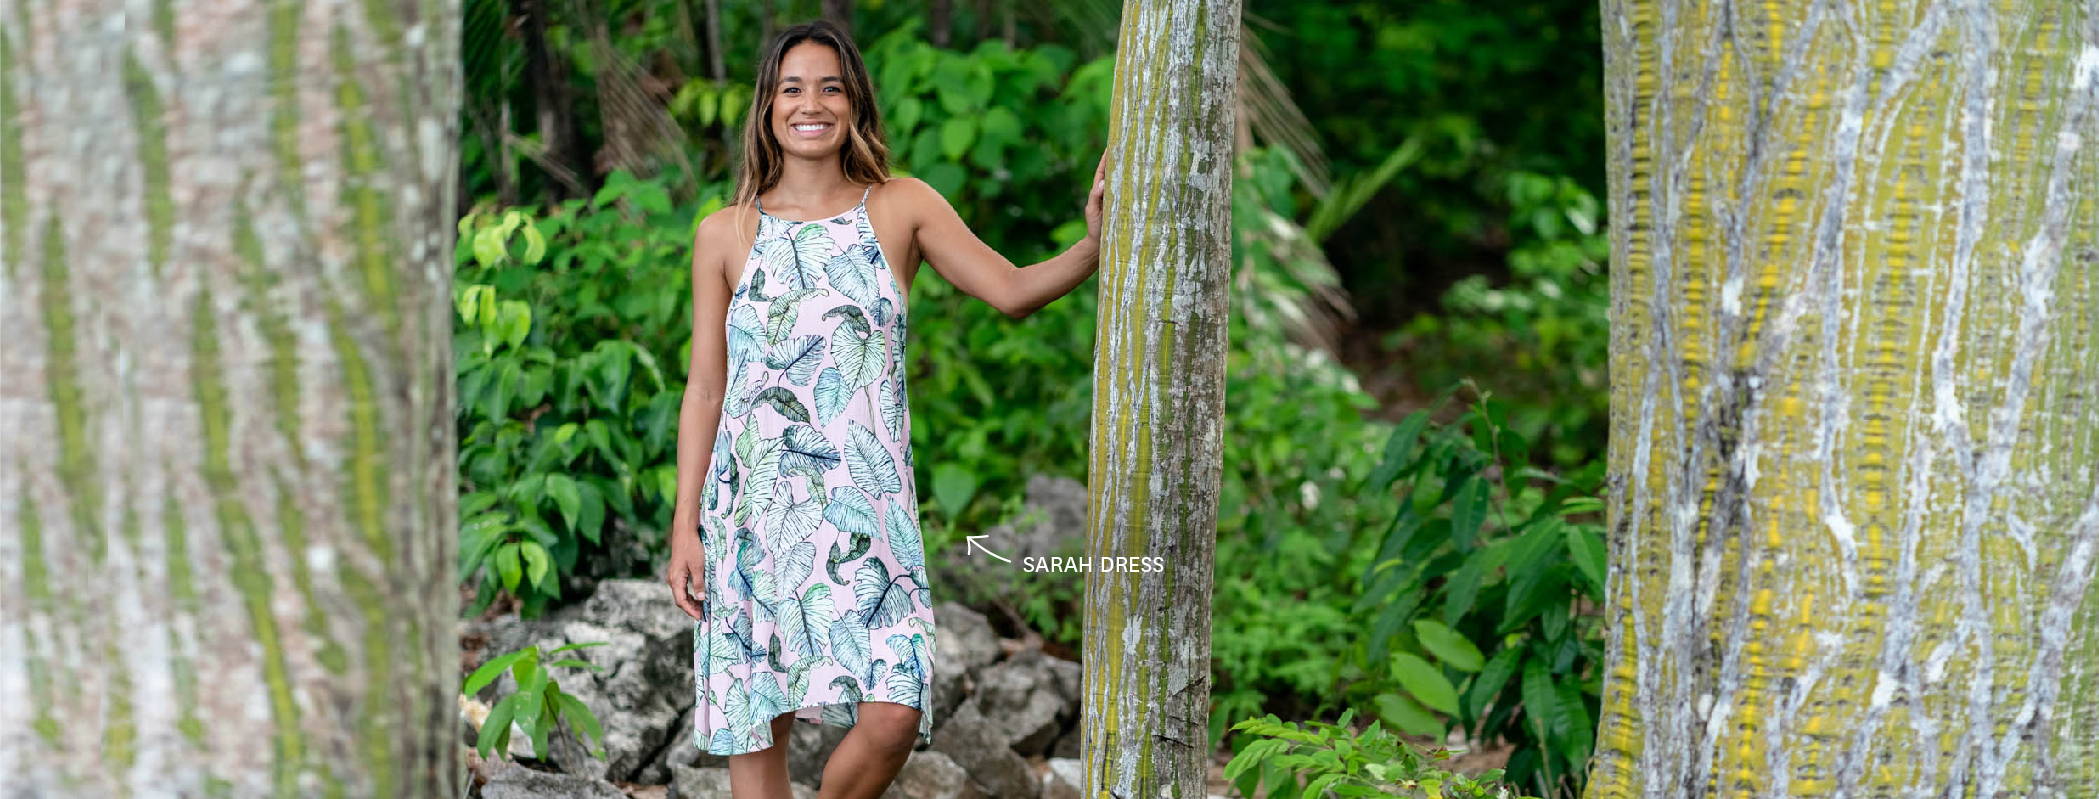 Get the Sarah Dress in our MAKANI print!